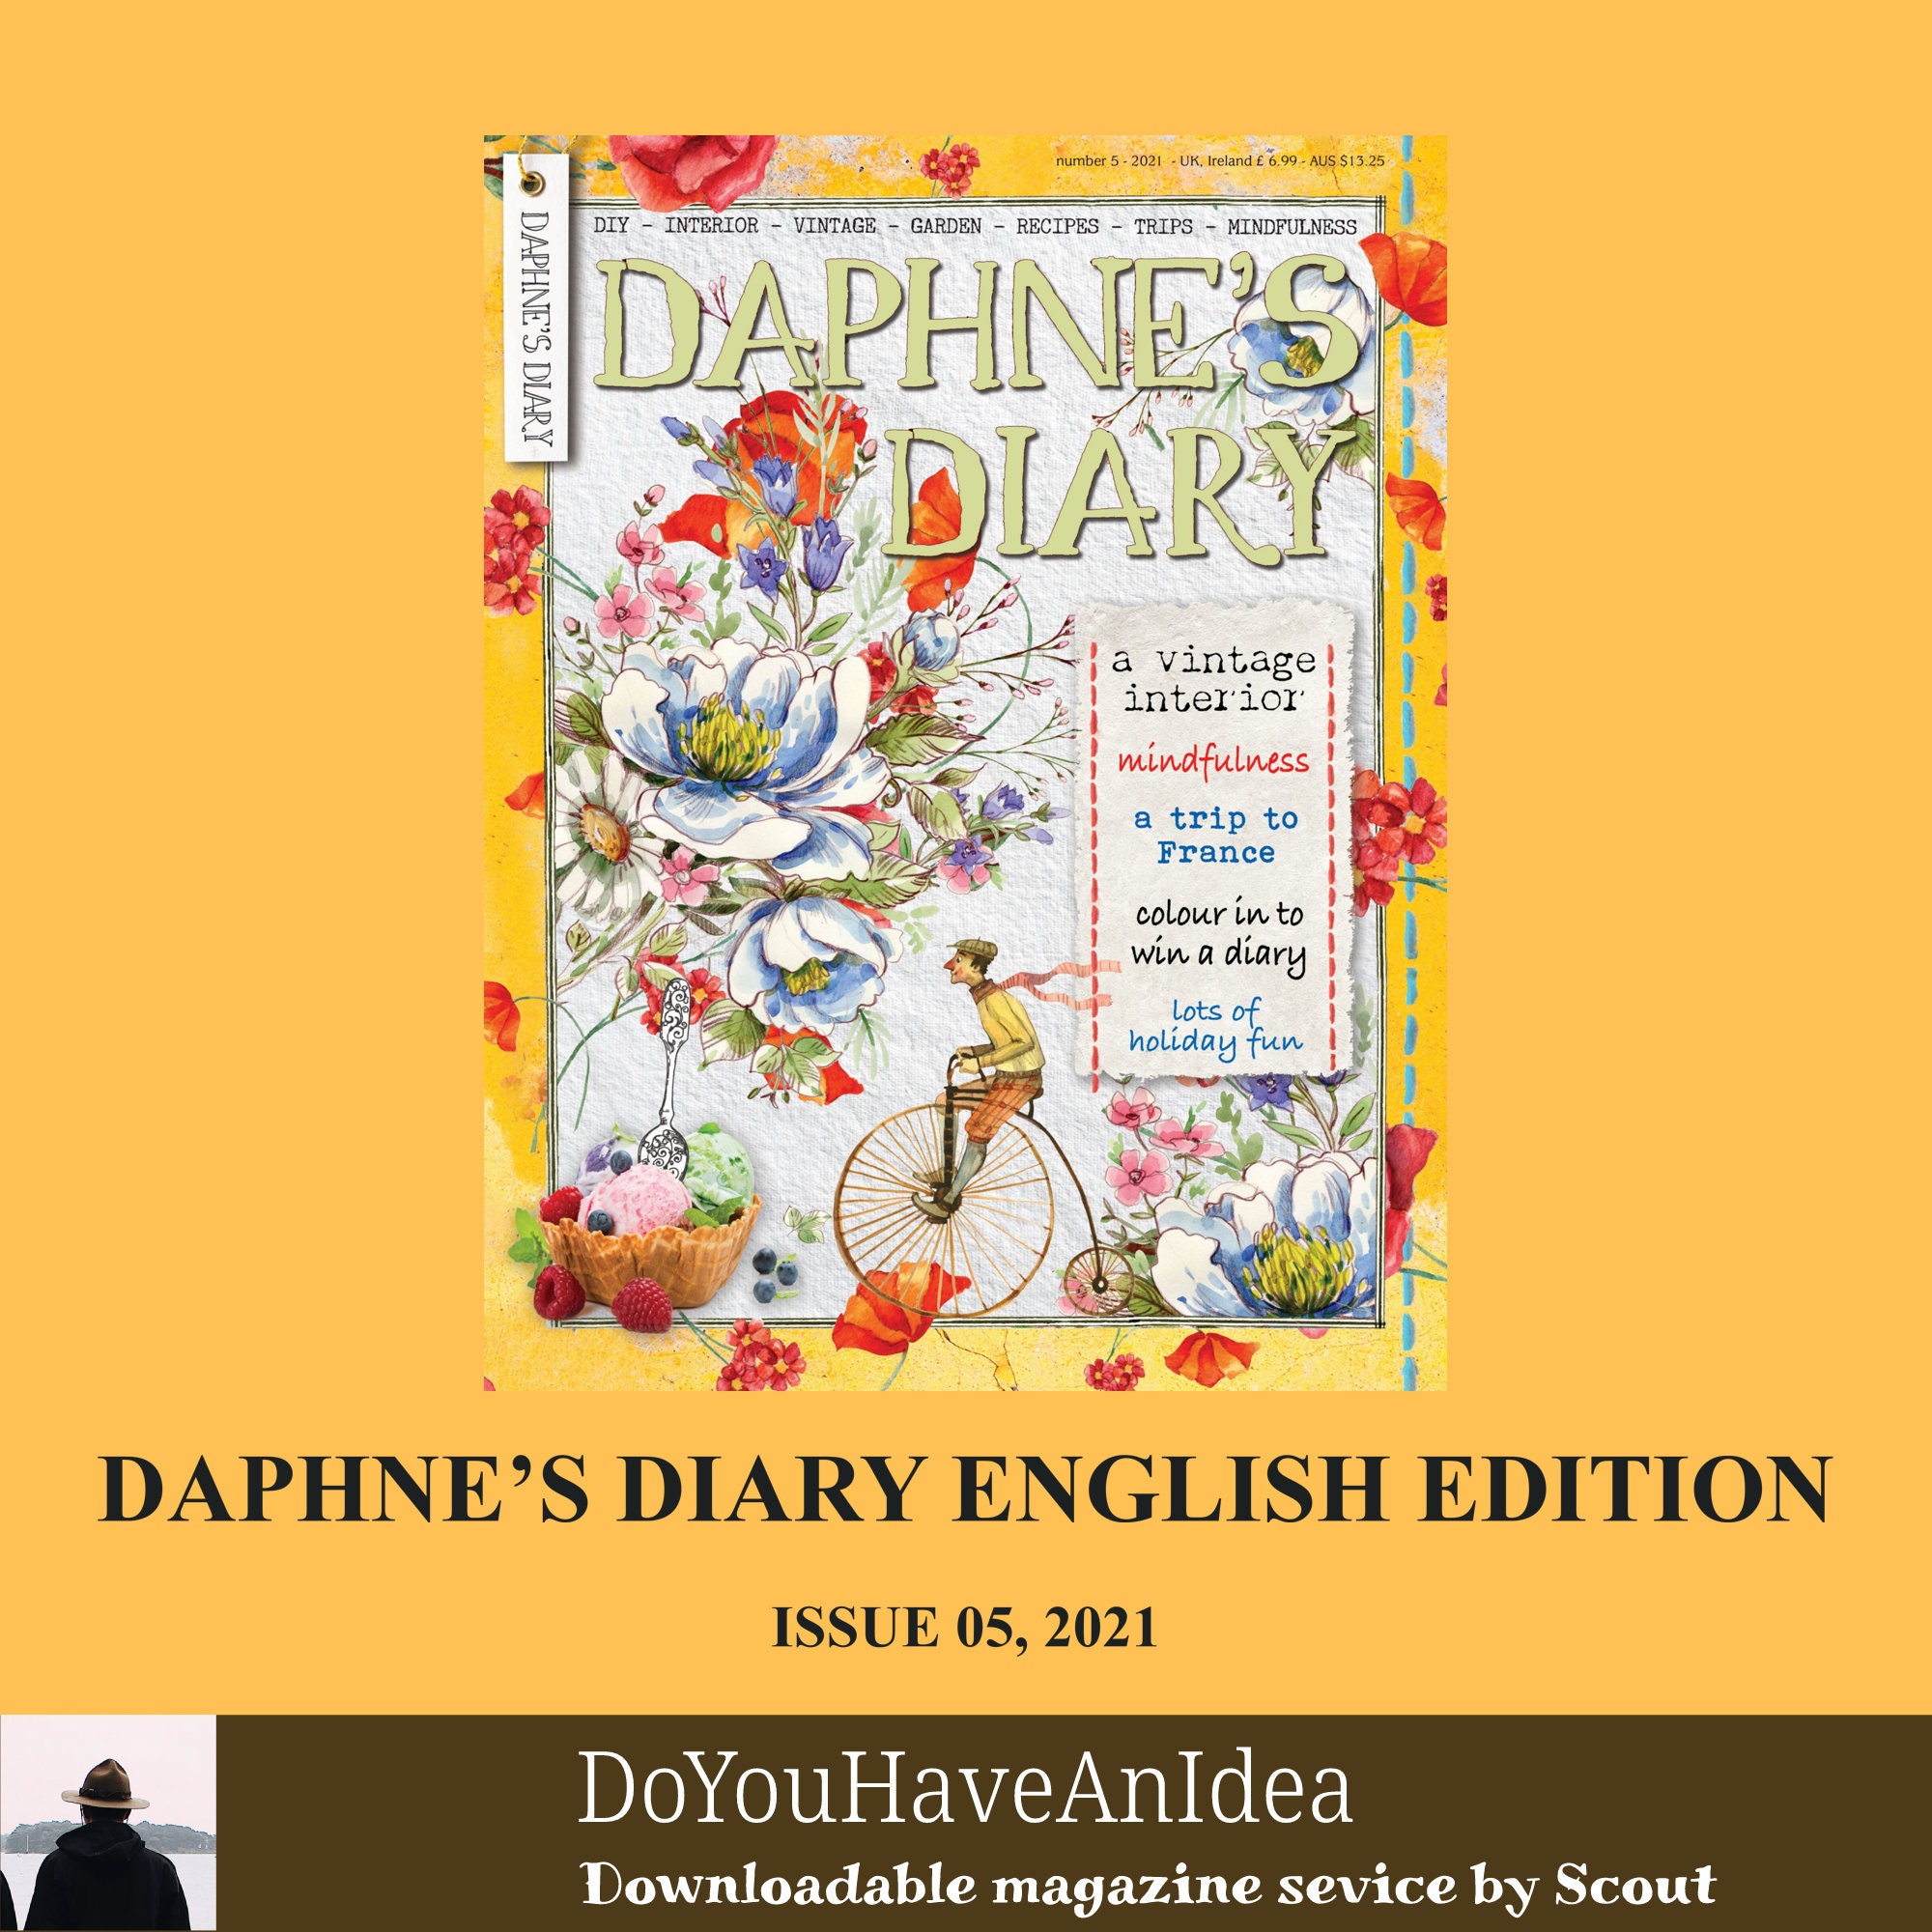 Daphnes Diary English Edition Issue 05, 2021 A Vintage Interior